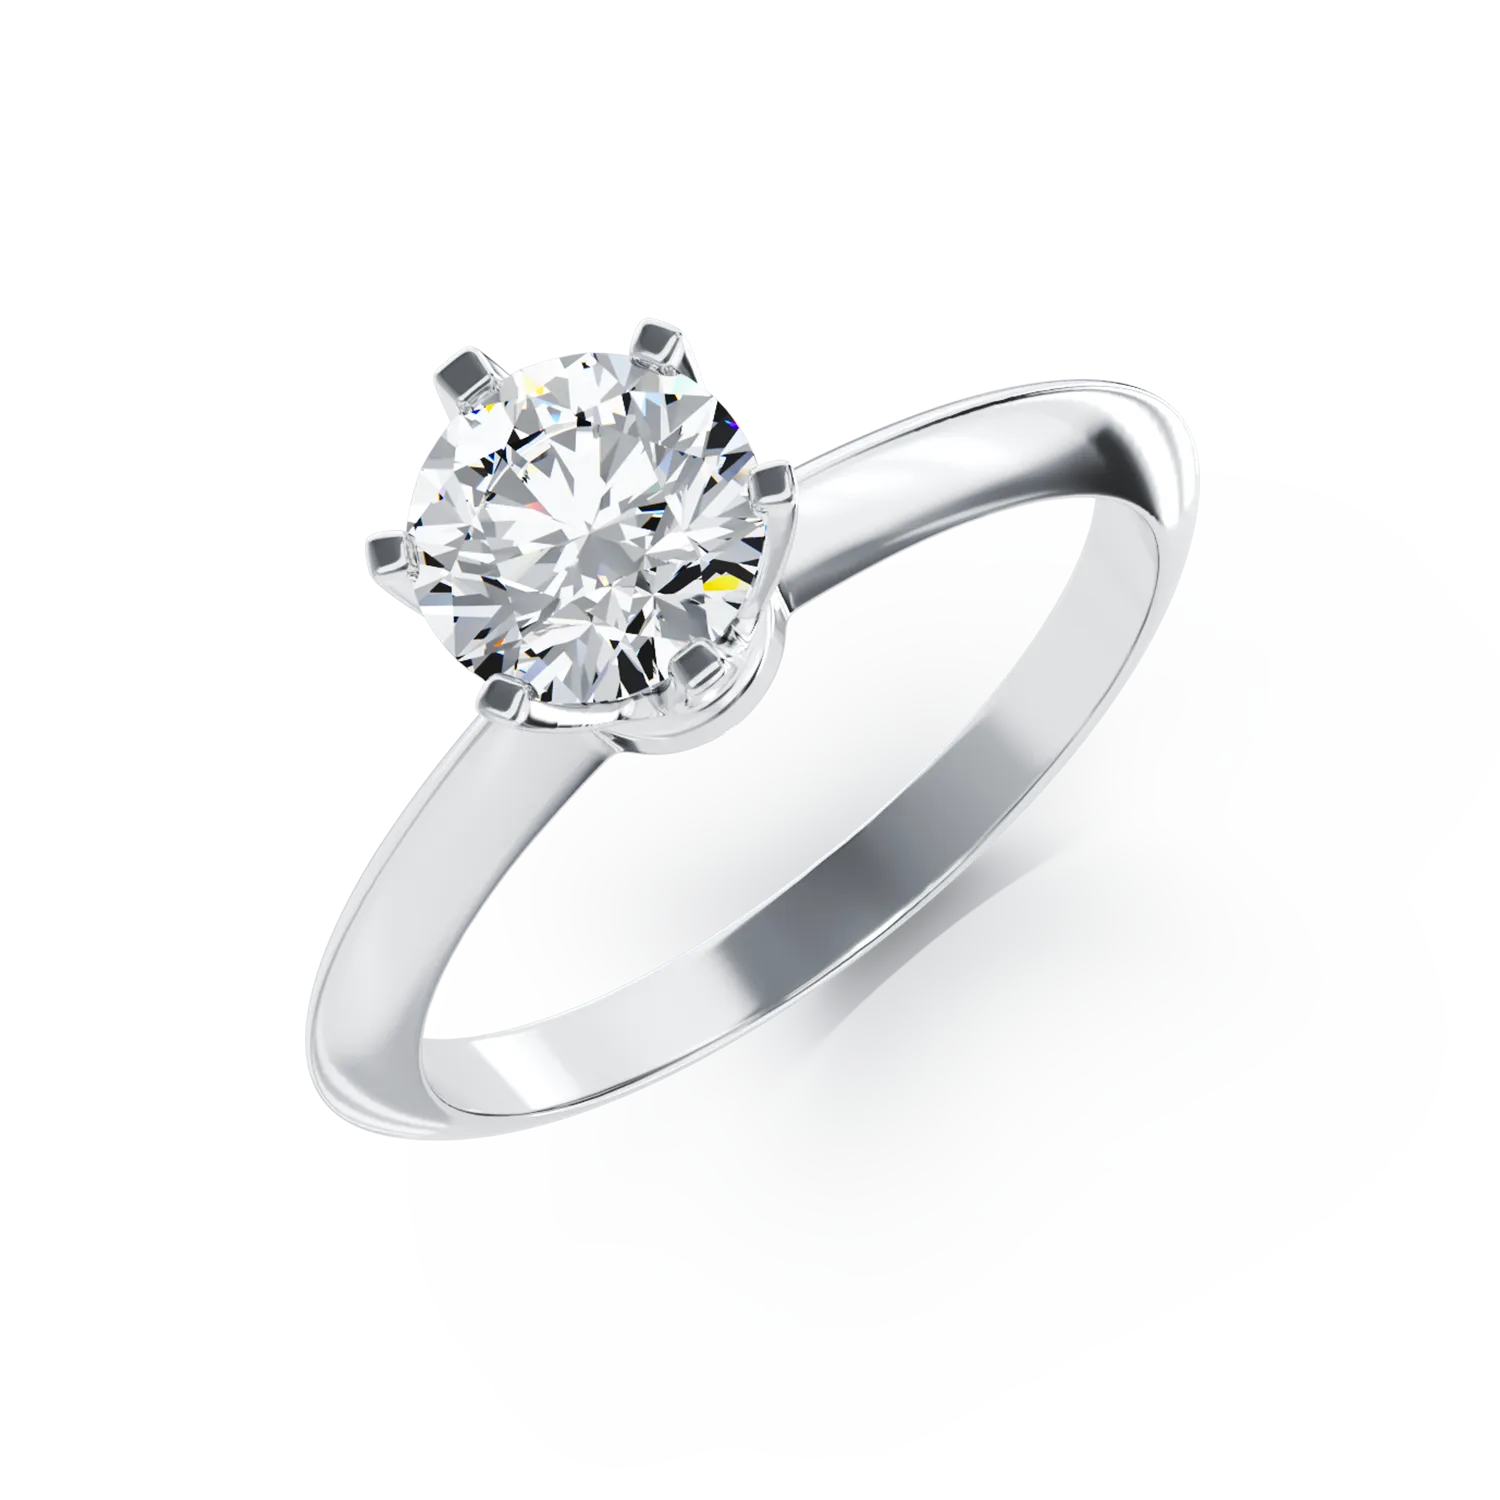 18K white gold engagement ring with 1.09ct diamond